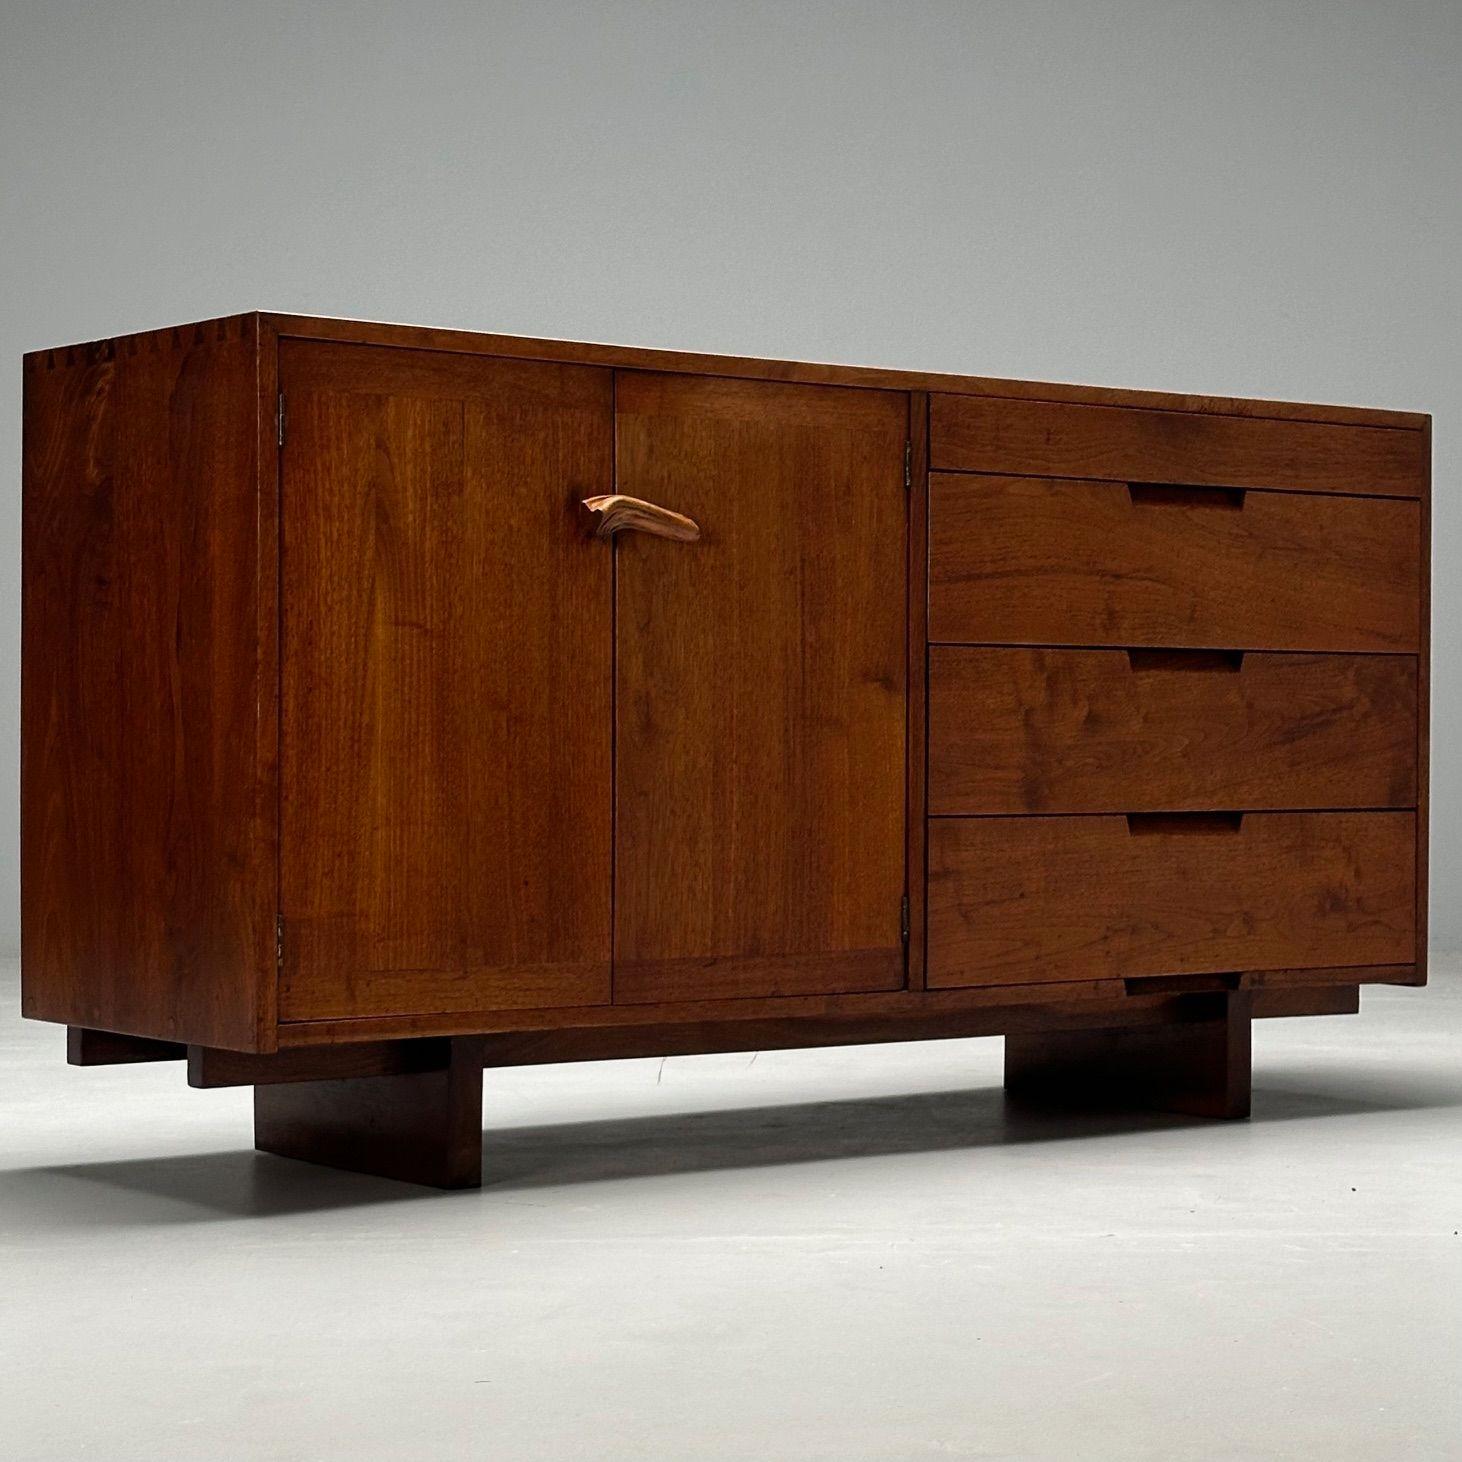 George Nakashima, American Studio, Mid-Century Modern, Rare Cabinet or Dresser, USA, 1953

Rare opportunity to acquire a special cabinet designed and produced by George Nakashima in New Hope, PA in 1953. This work features two doors concealing two